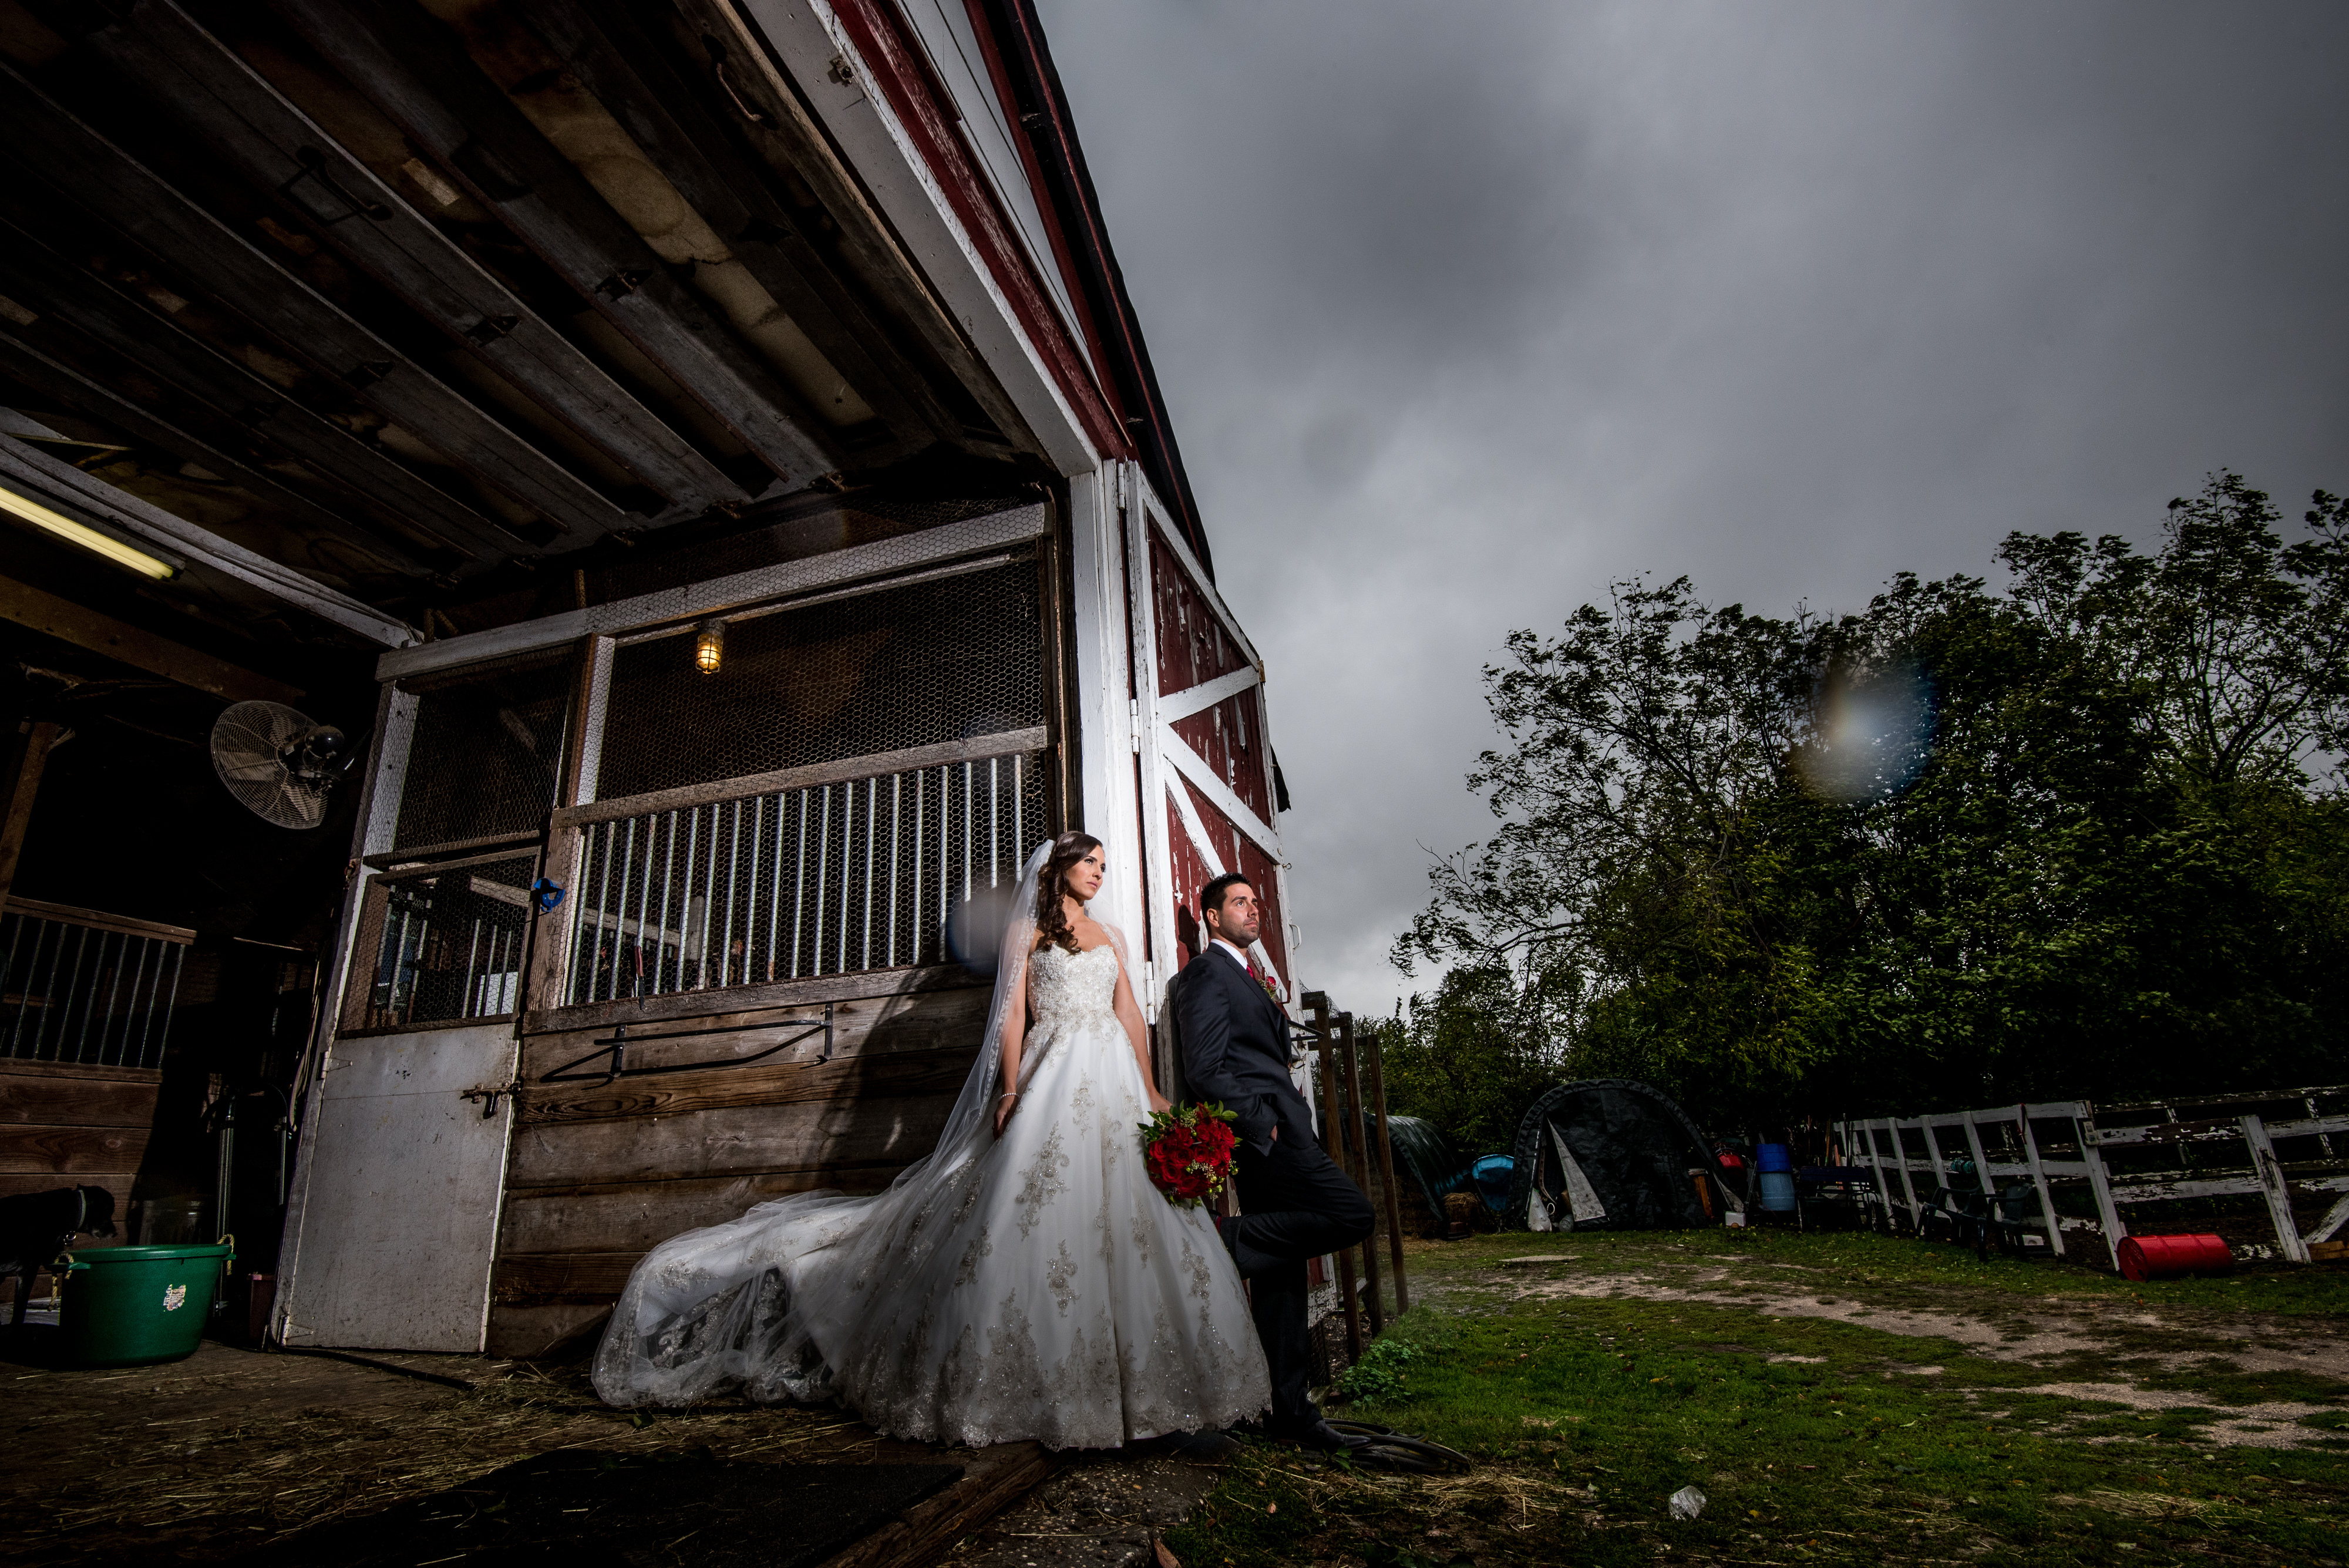 Bridge and groom pose in front of a barn | Lotus Wedding Photography